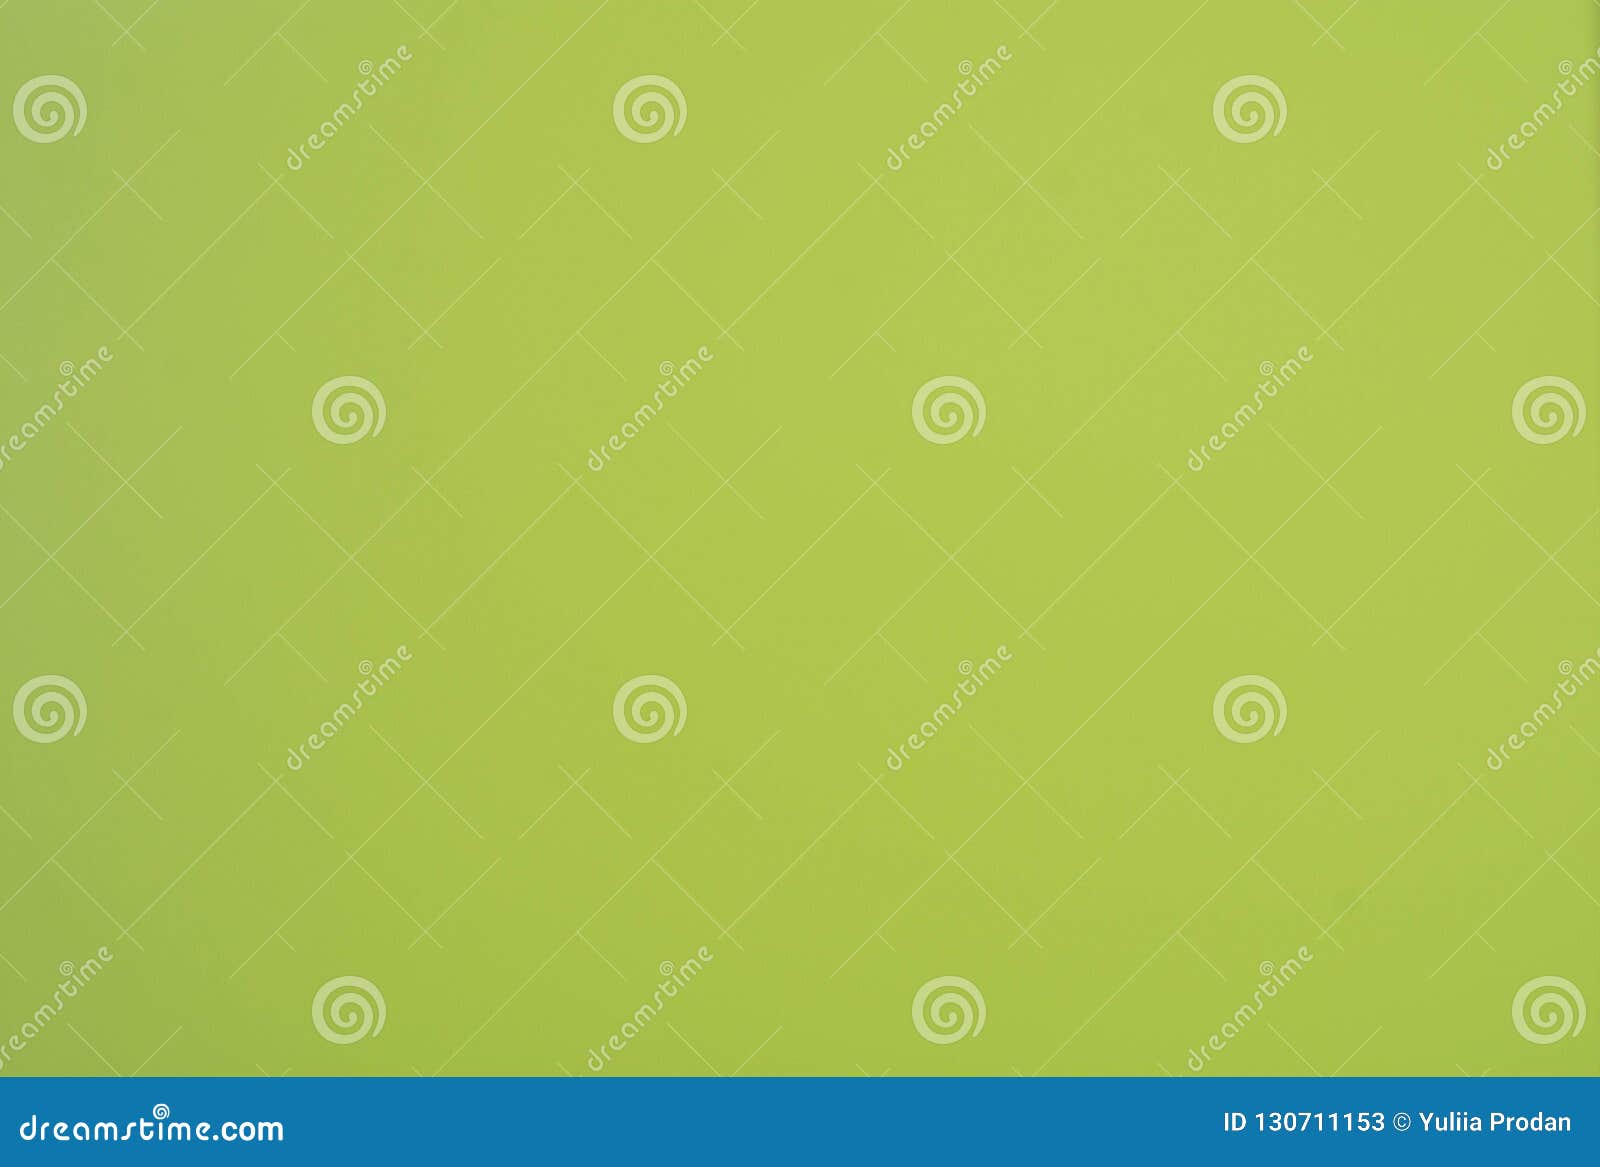 Green Background, Green Texture, Lime Green Background Design, Green  Wallpaper Stock Image - Image of texture, spring: 130711153